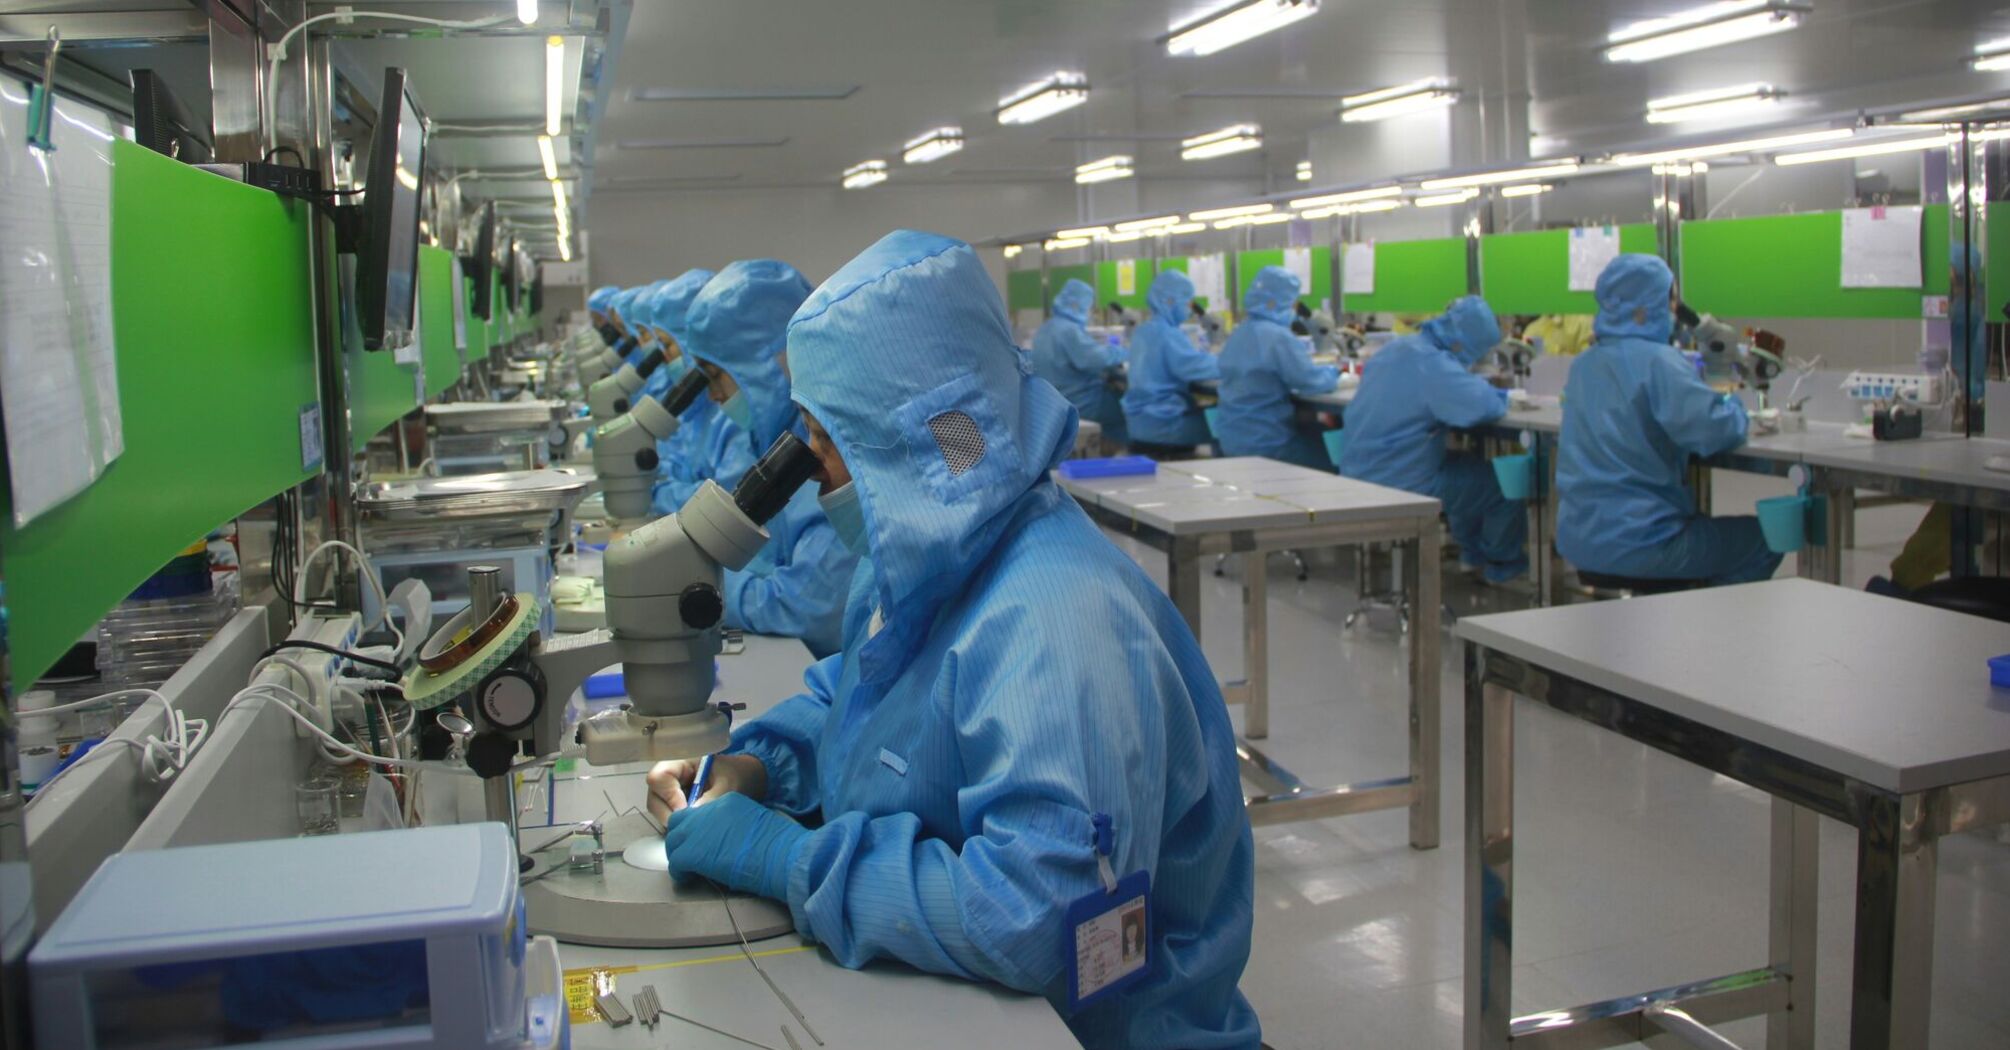 Workers in blue protective suits operating microscopes and equipment in a clean, brightly lit laboratory 